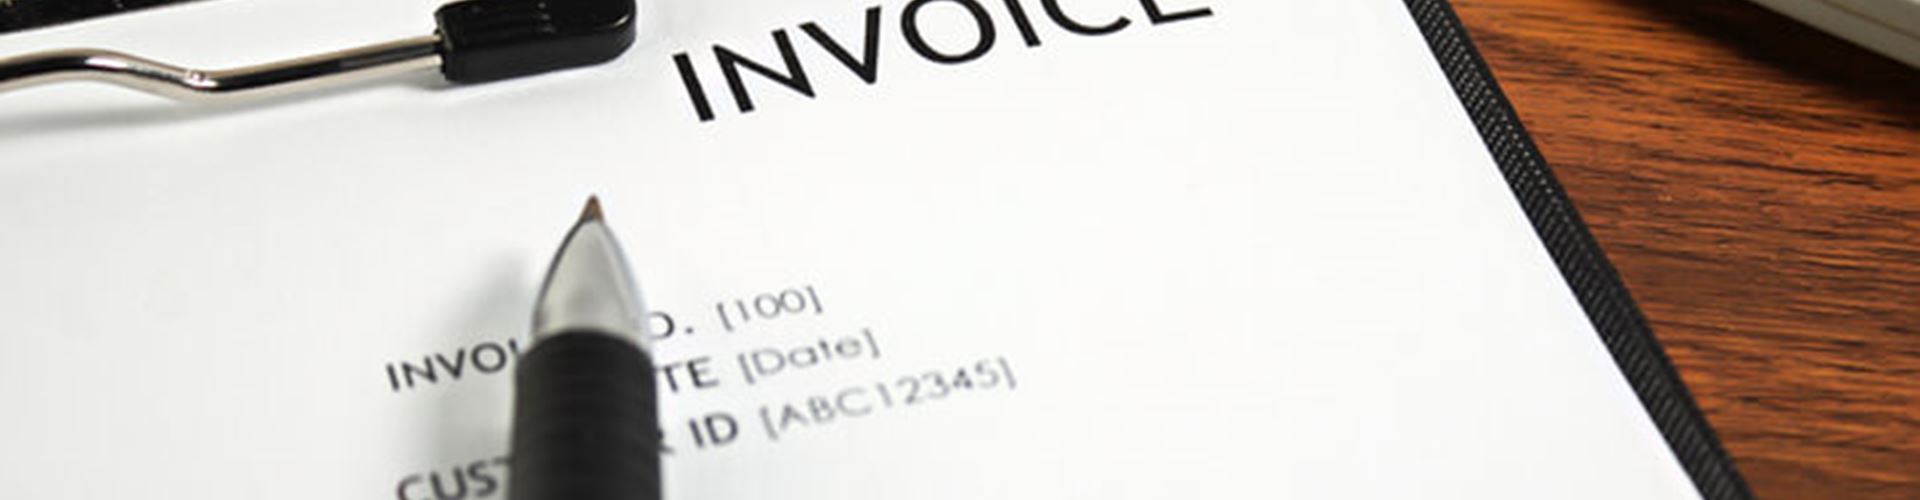 Invoice lending becoming popular with small businesses, research shows